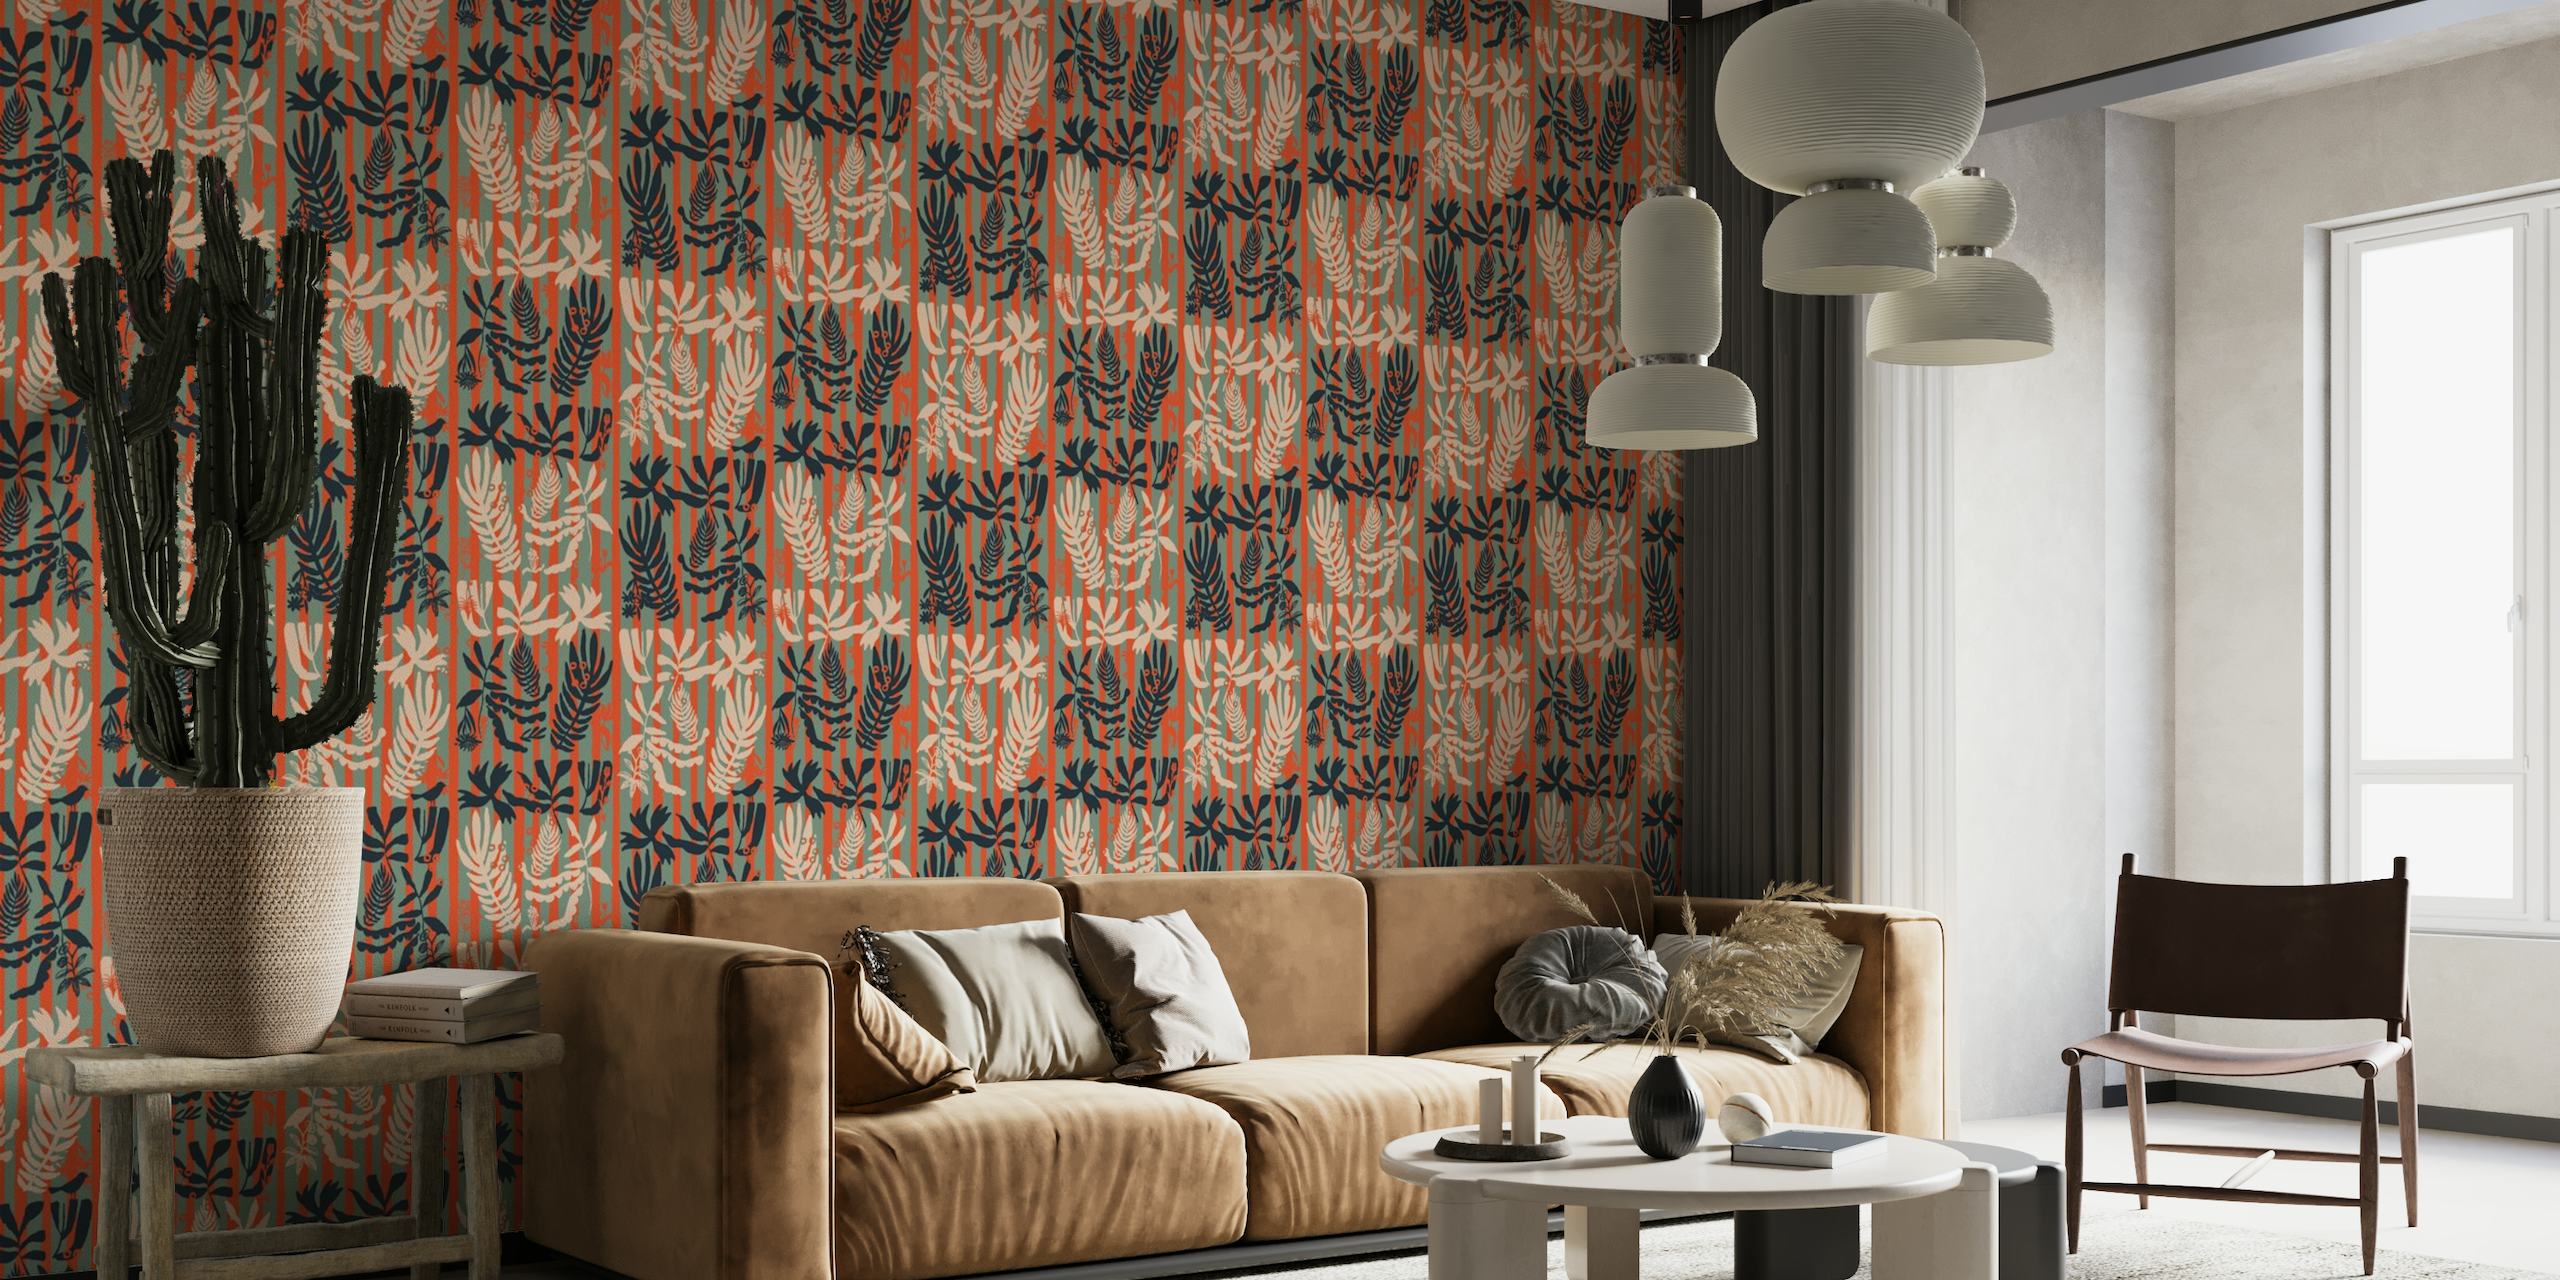 Abstract Jungle wall mural with coral, cerulean, and ochre foliage patterns on a muted background